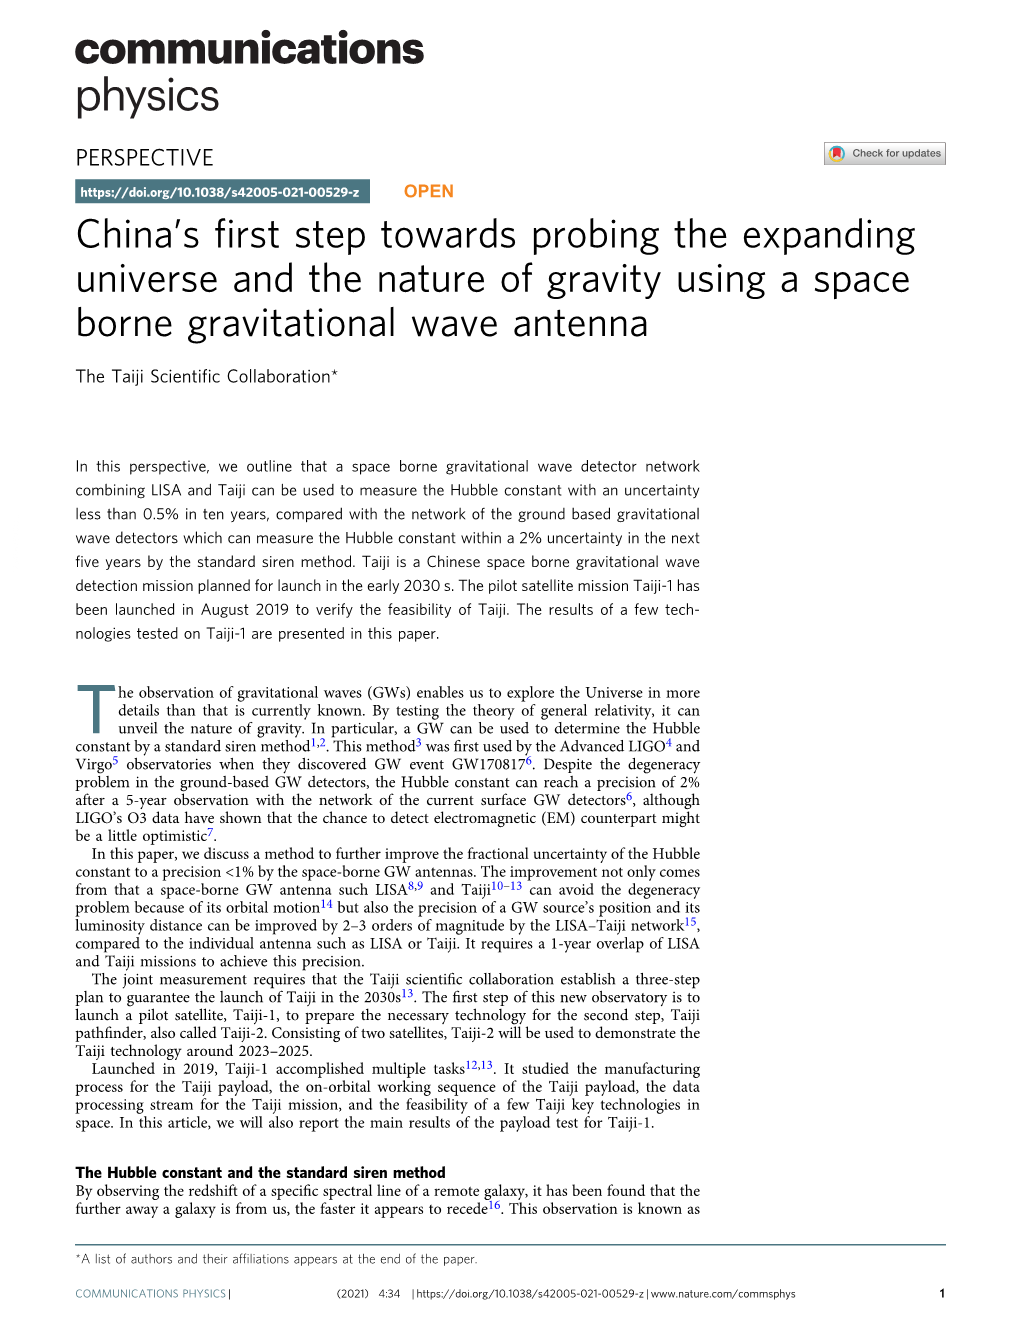 China's First Step Towards Probing the Expanding Universe and the Nature of Gravity Using a Space Borne Gravitational Wave